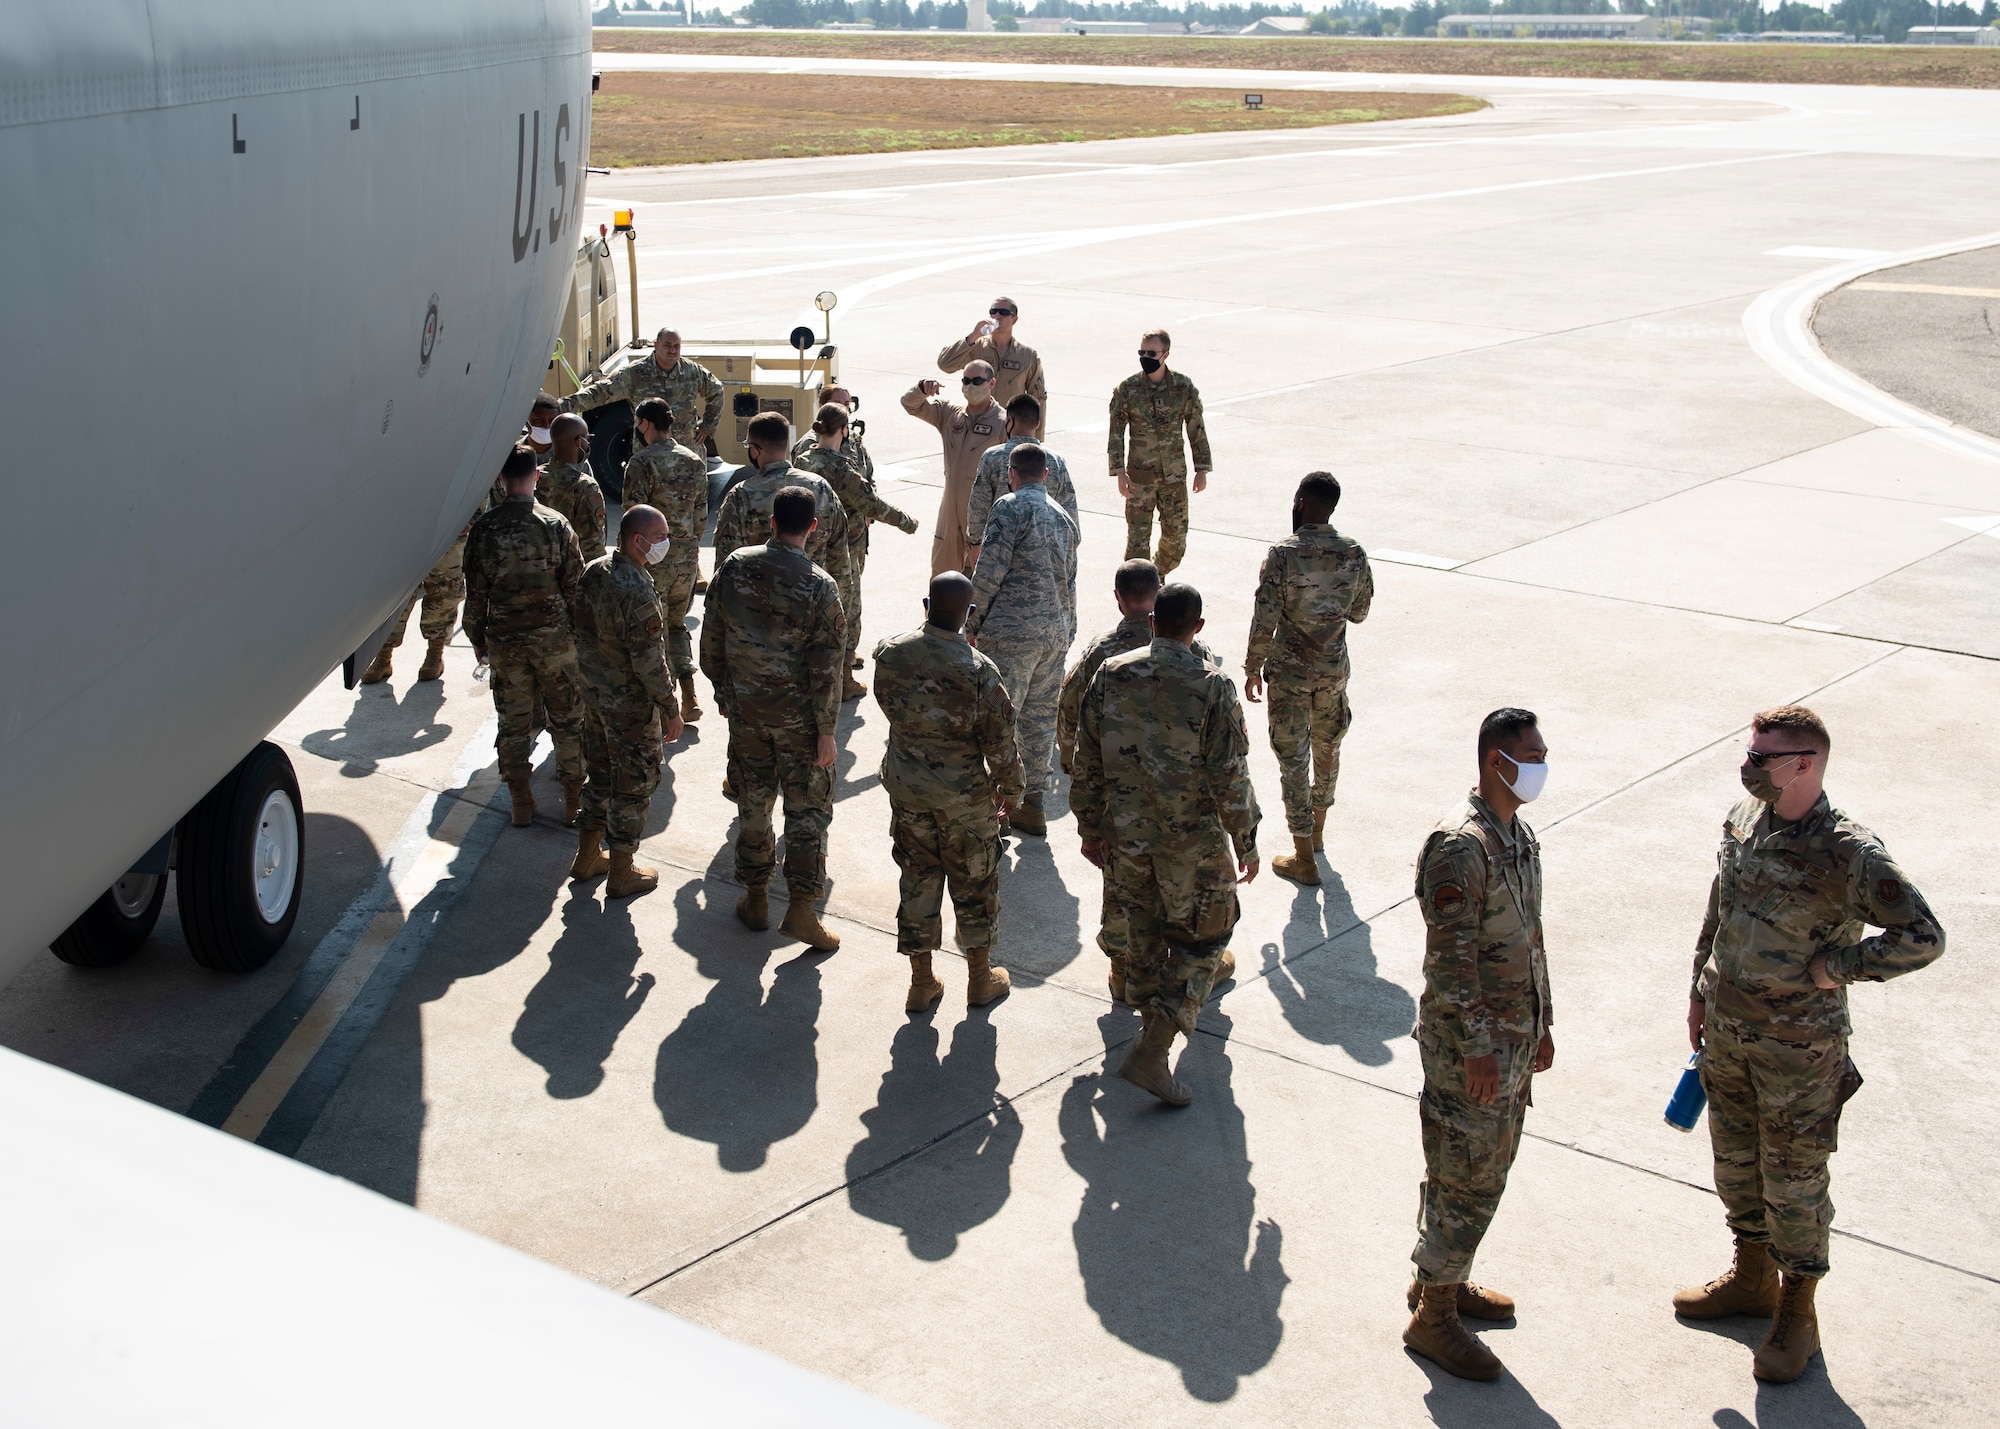 More than 20 Airmen gather near a parked KC-135 Stratotanker for a tour of the aircraft on the Incirlik Air Base flight line, August 17, 2020.